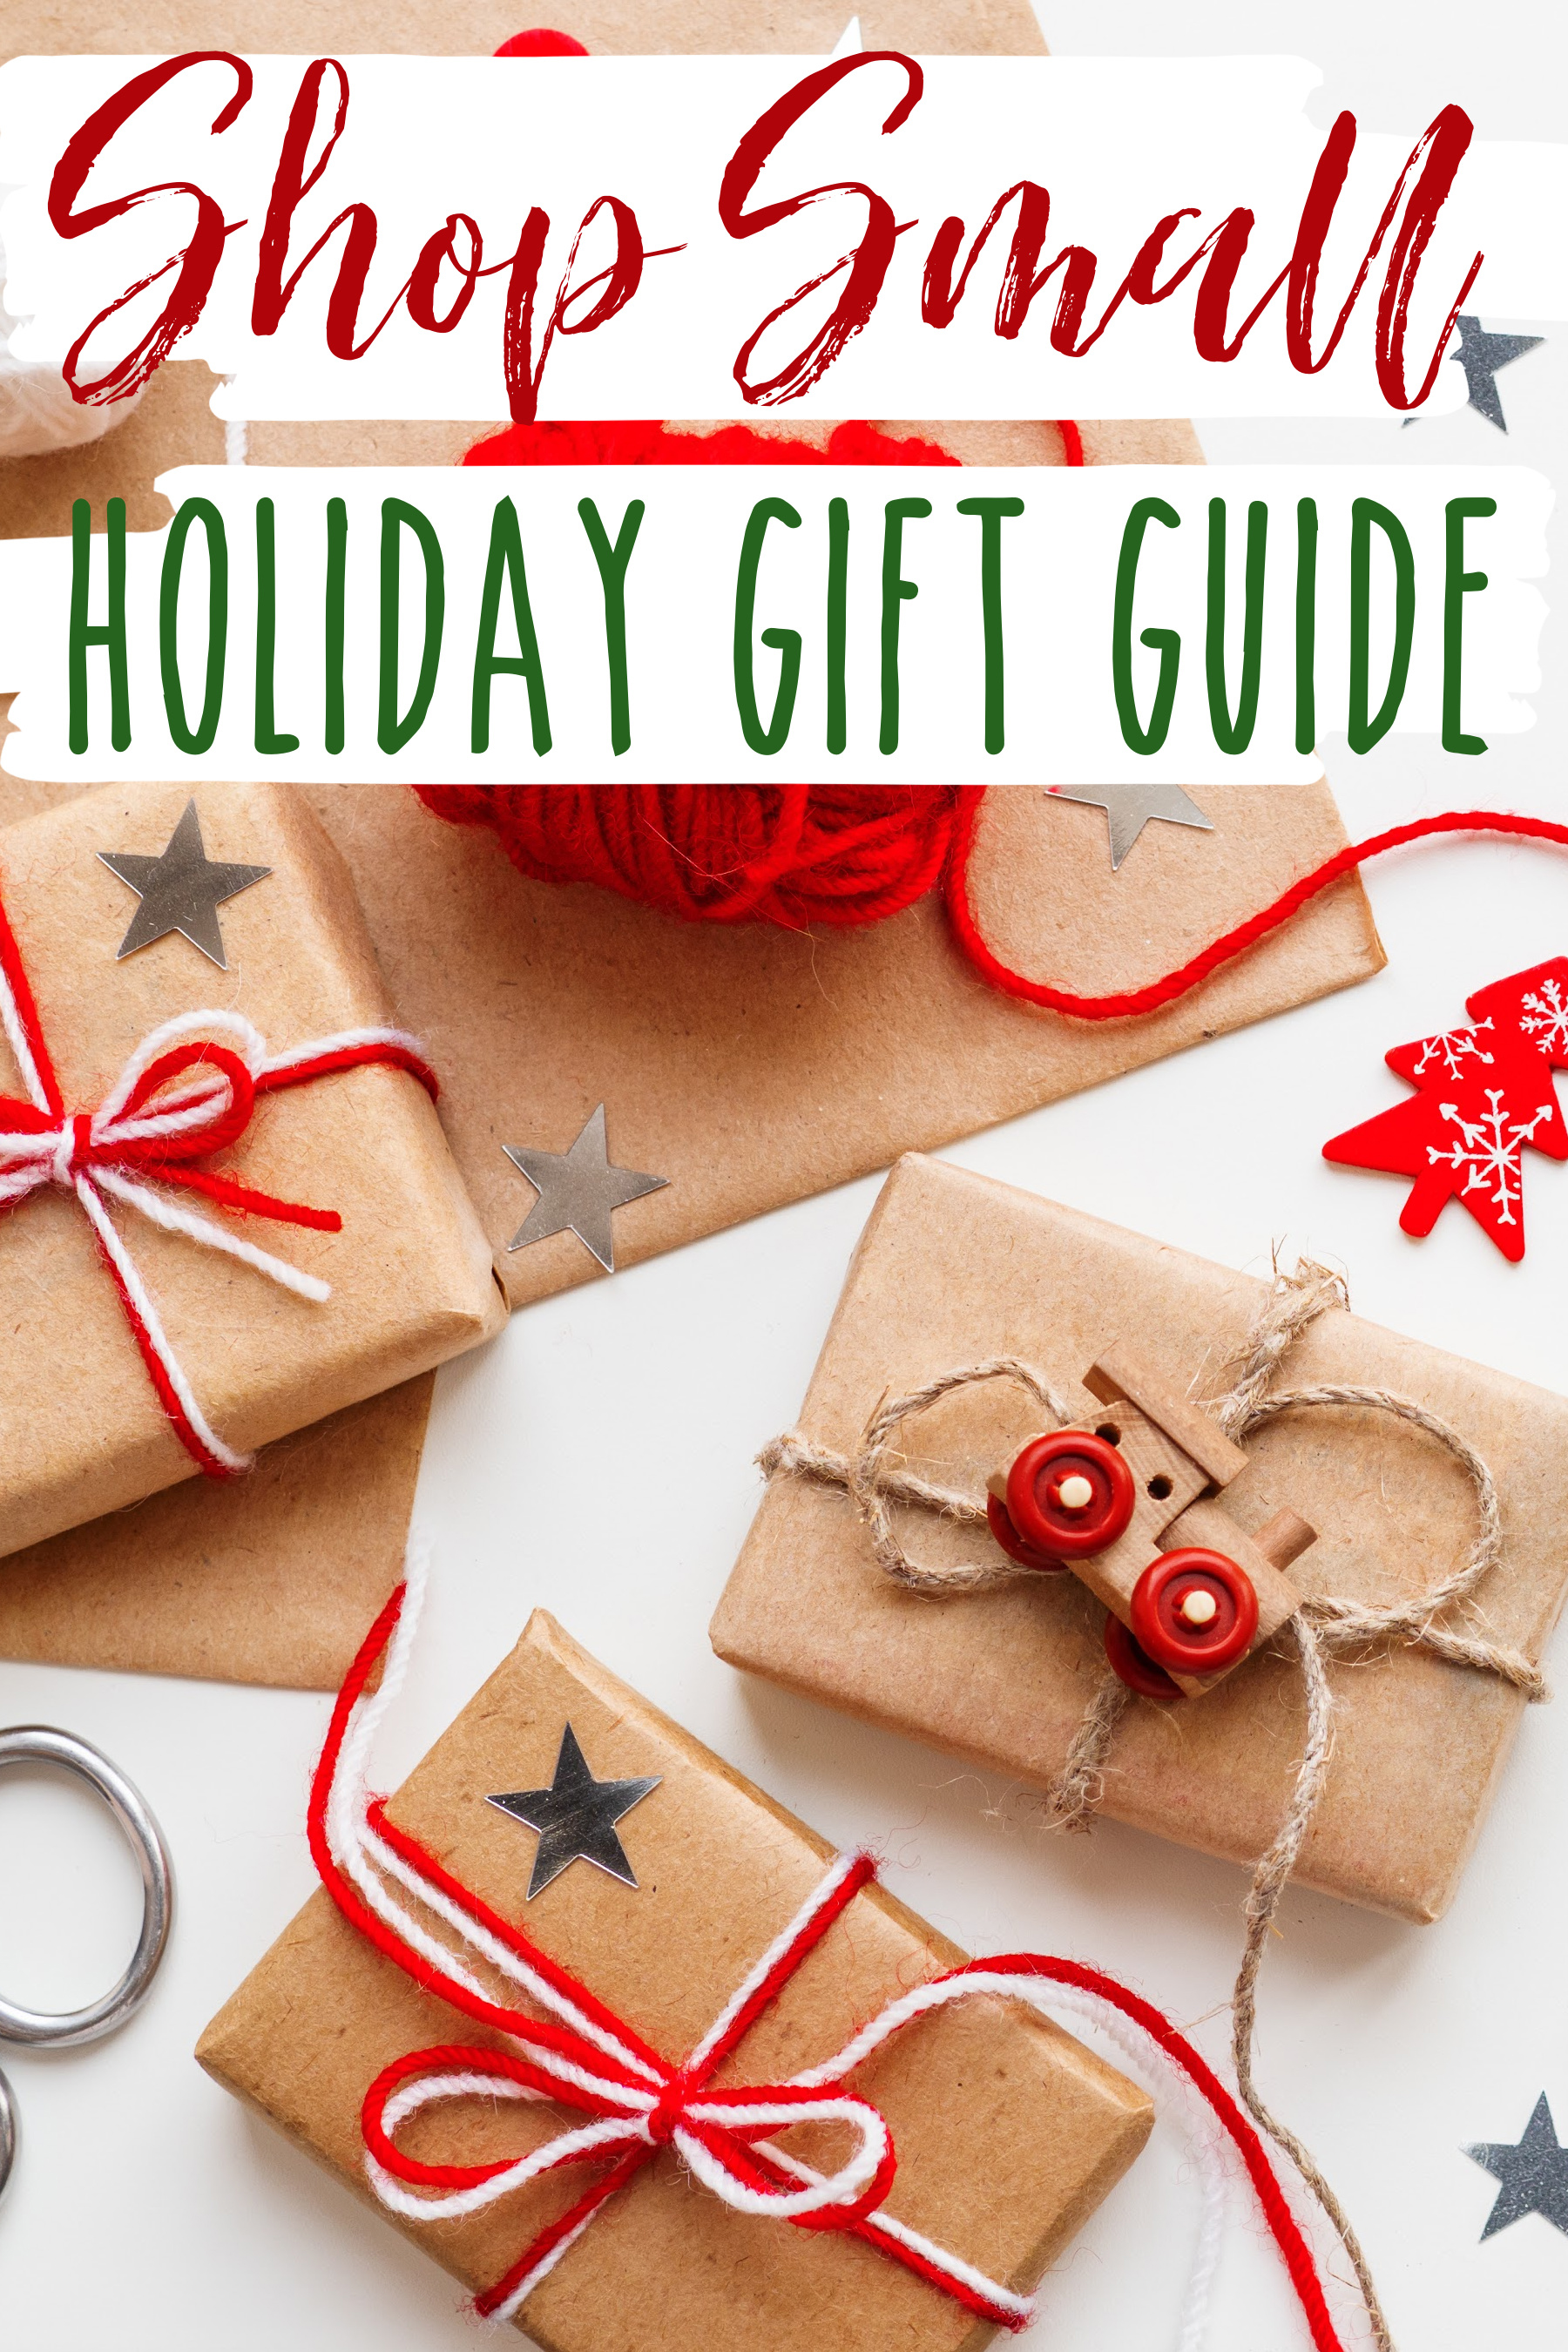 Shop Small Holiday Gift Guide